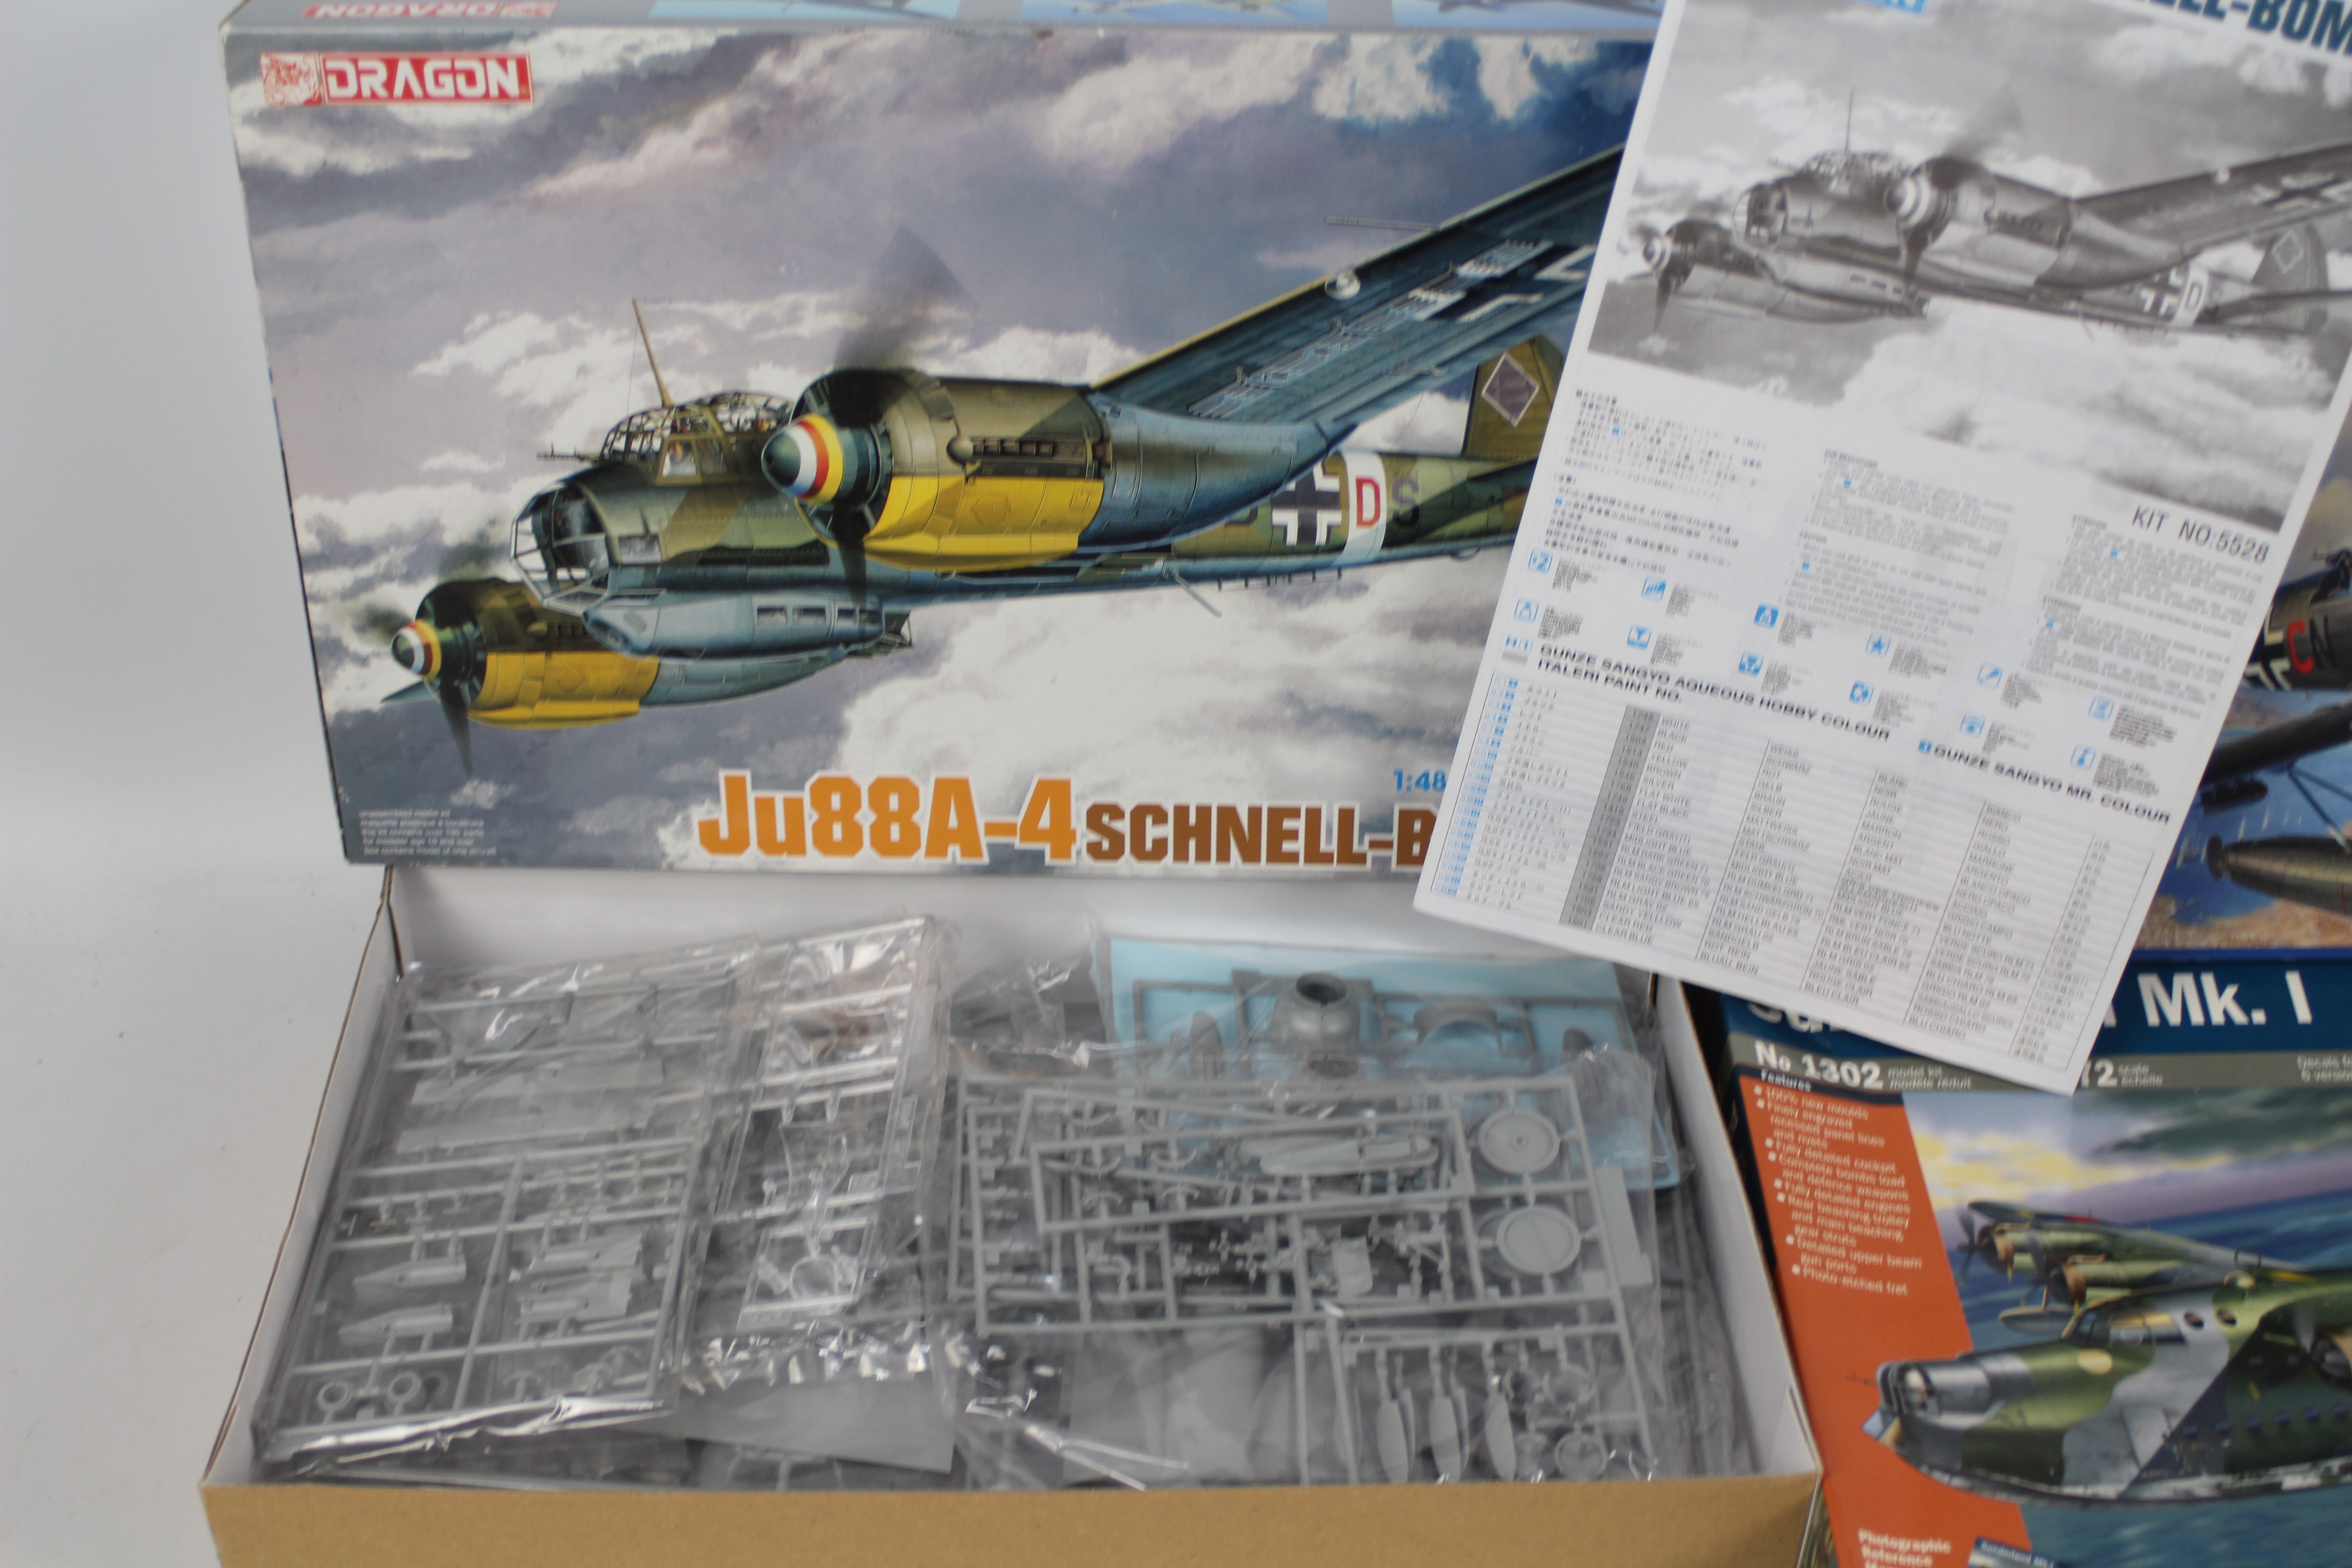 Italeri - Revell - Dragon - Three boxed military aircraft plastic model kits in various scales. - Image 2 of 4